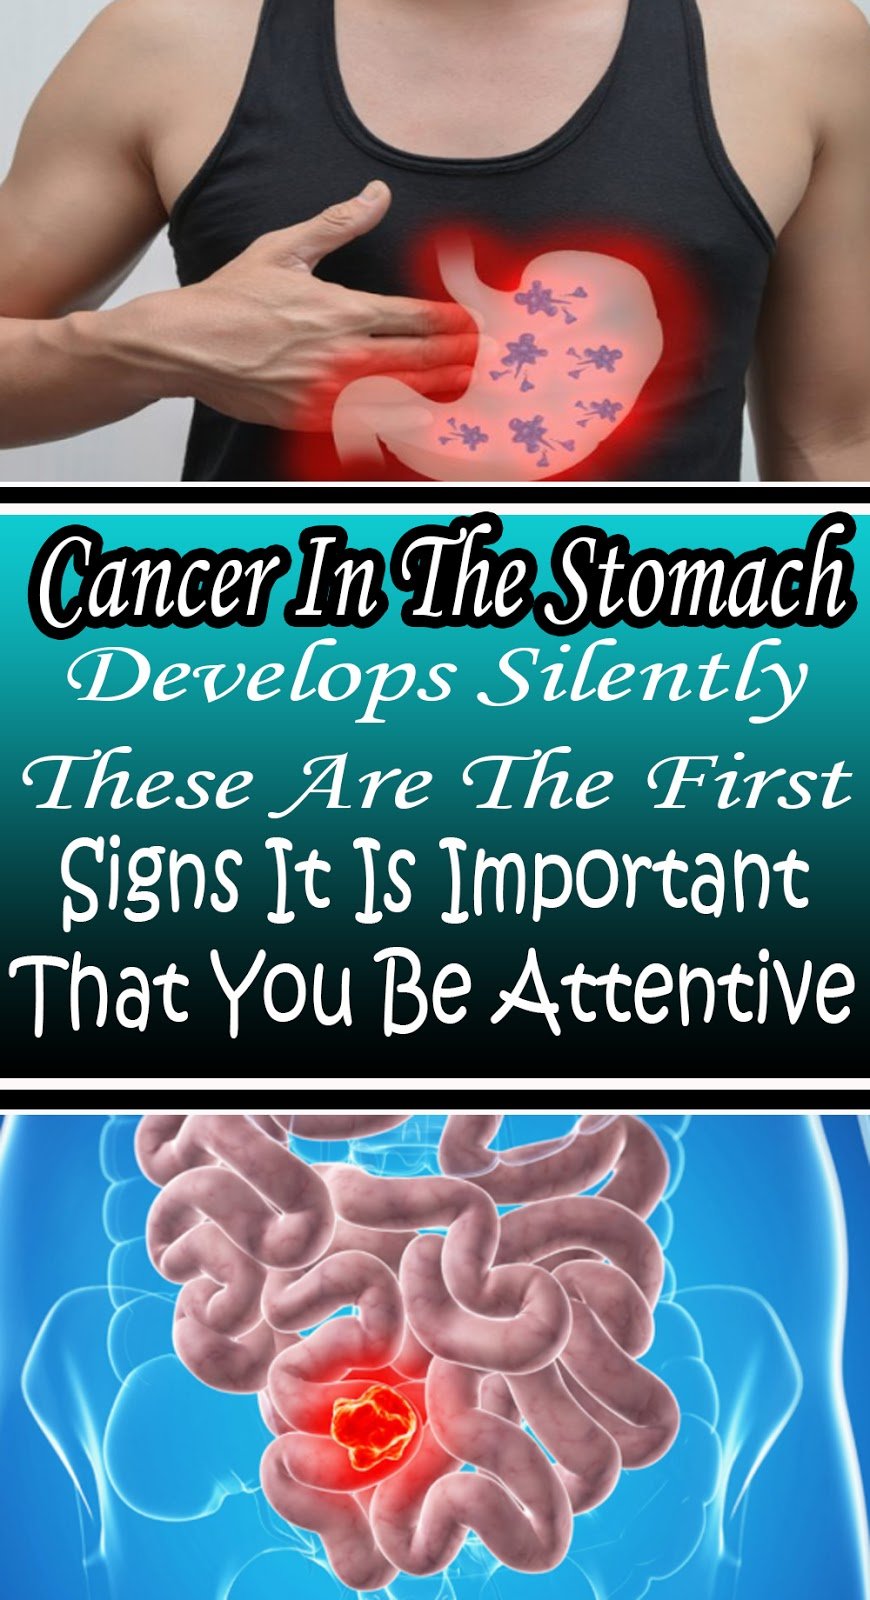 Cancer In The Stomach Develops Silently. These Are The ...